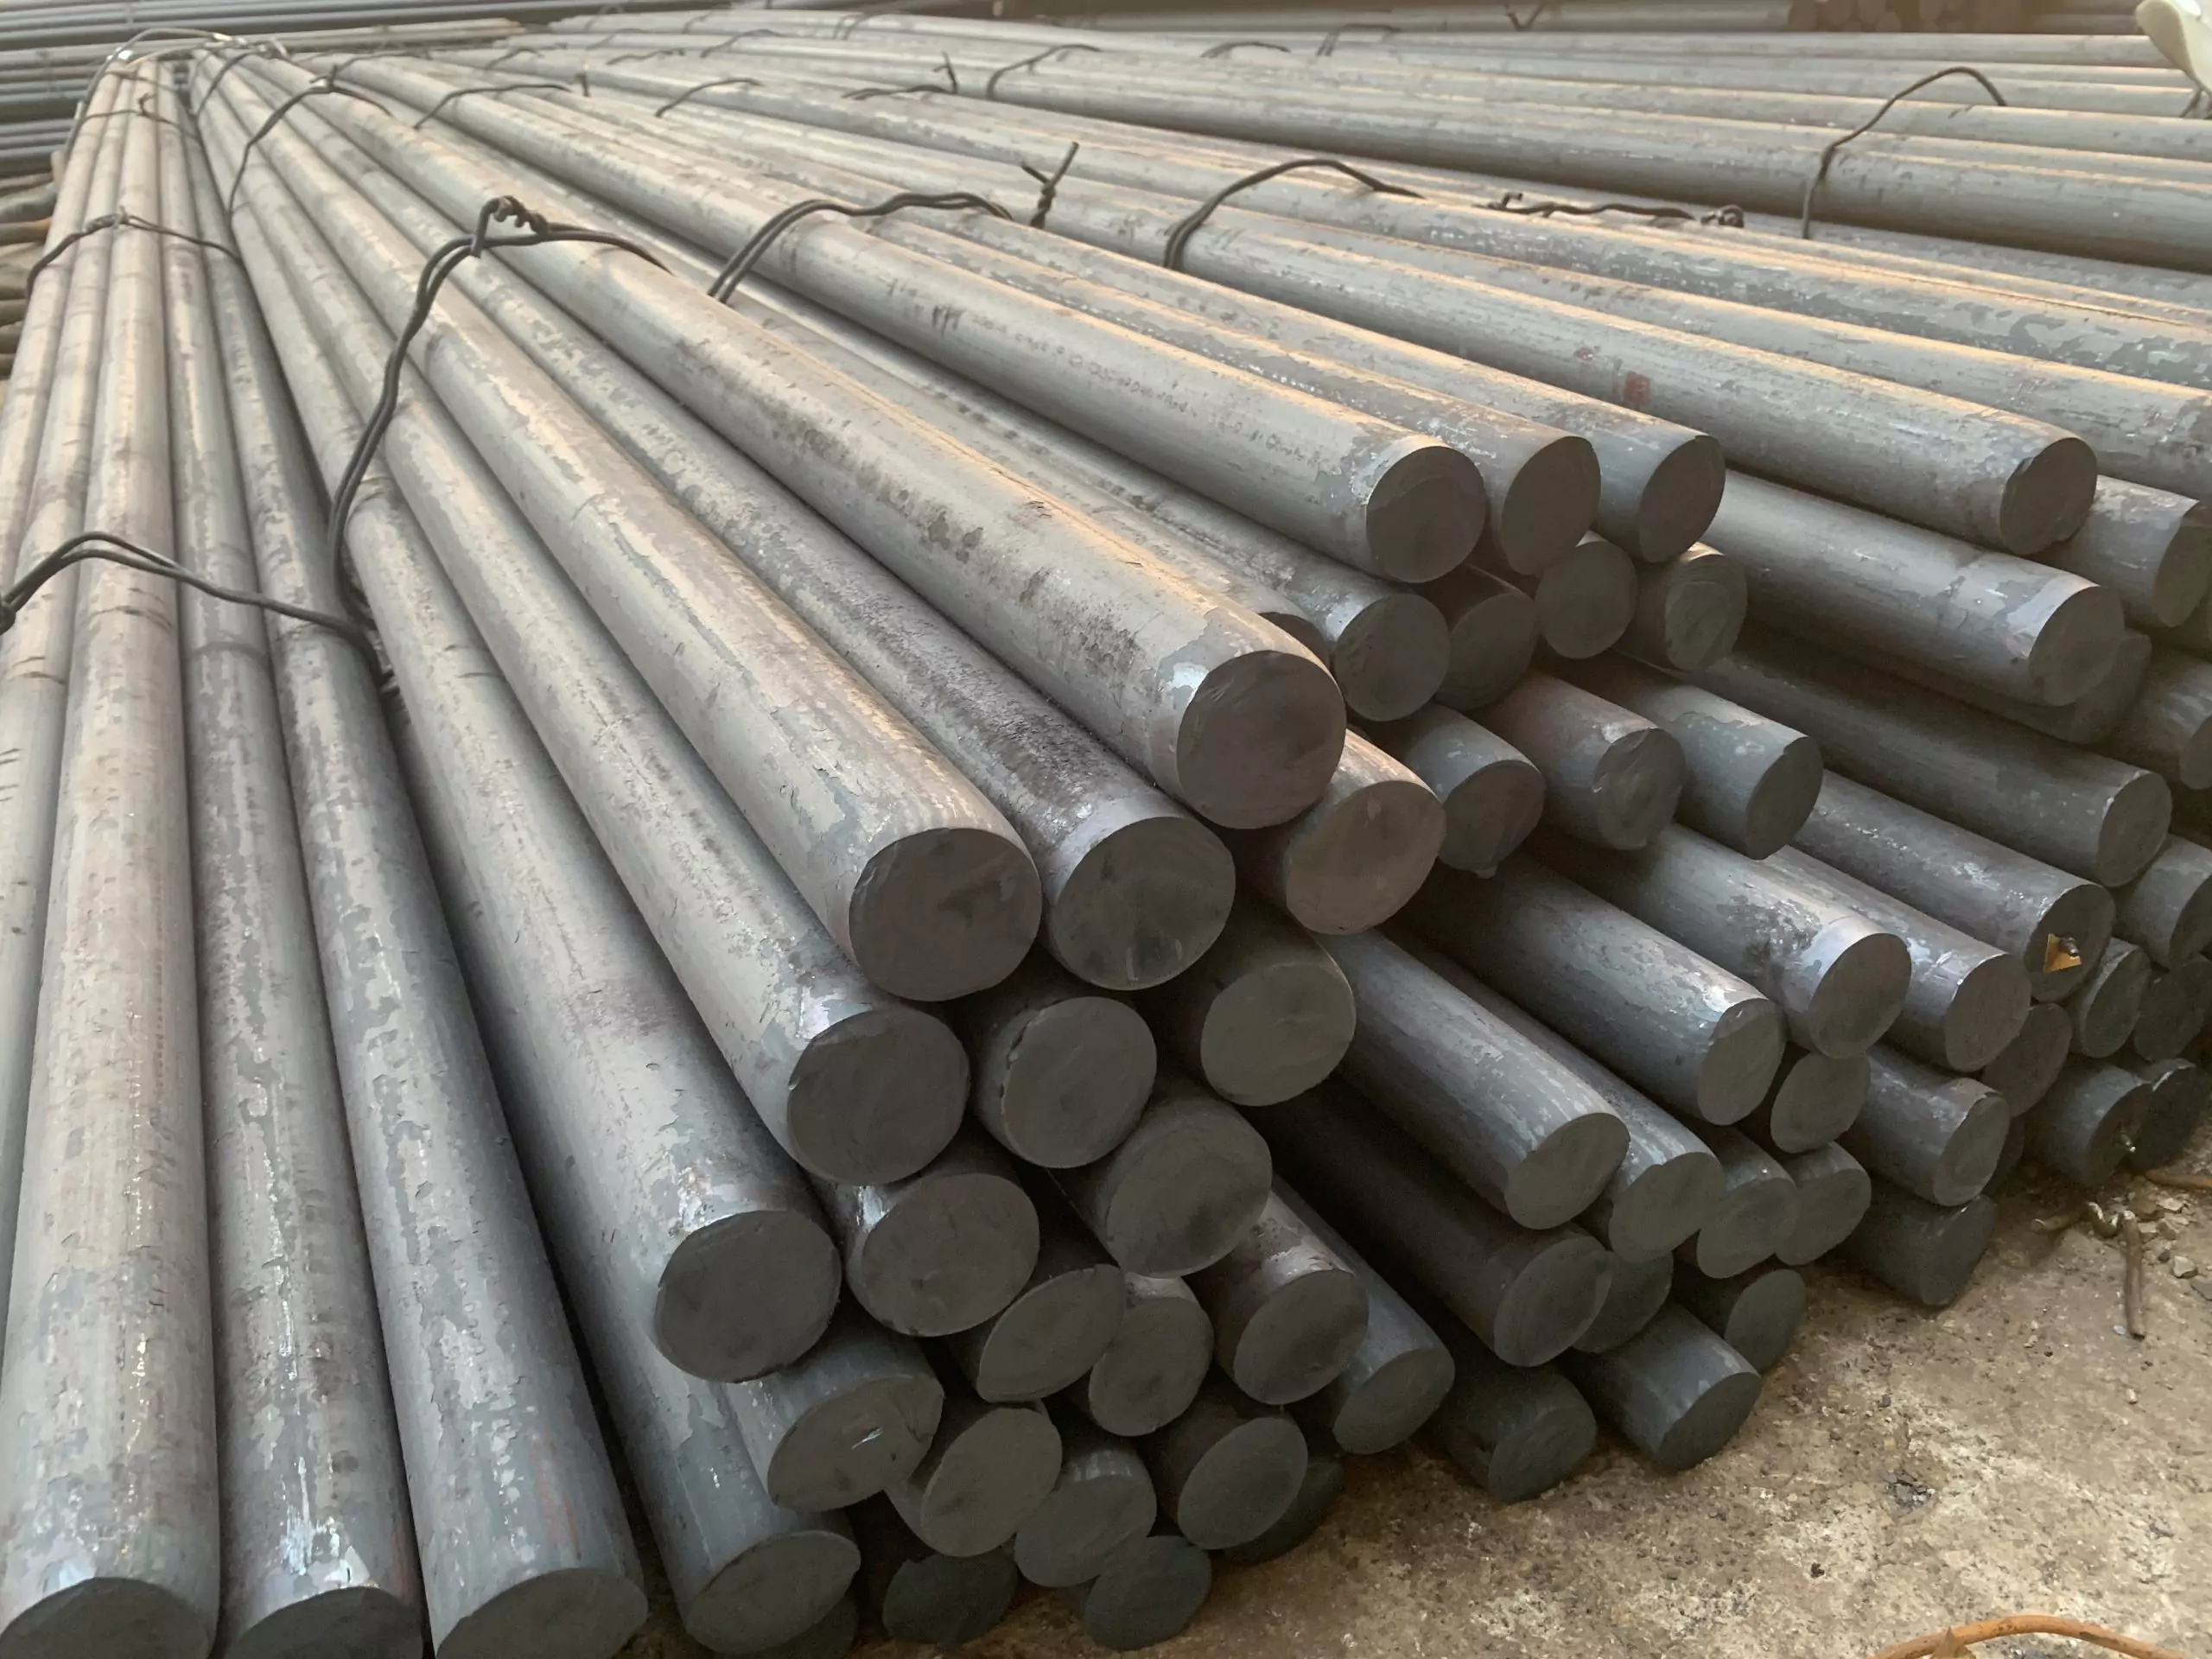 In the construction industry, the utilization of high-carbon steel extends beyond tools into essential building materials that form the backbone of structural projects worldwide.